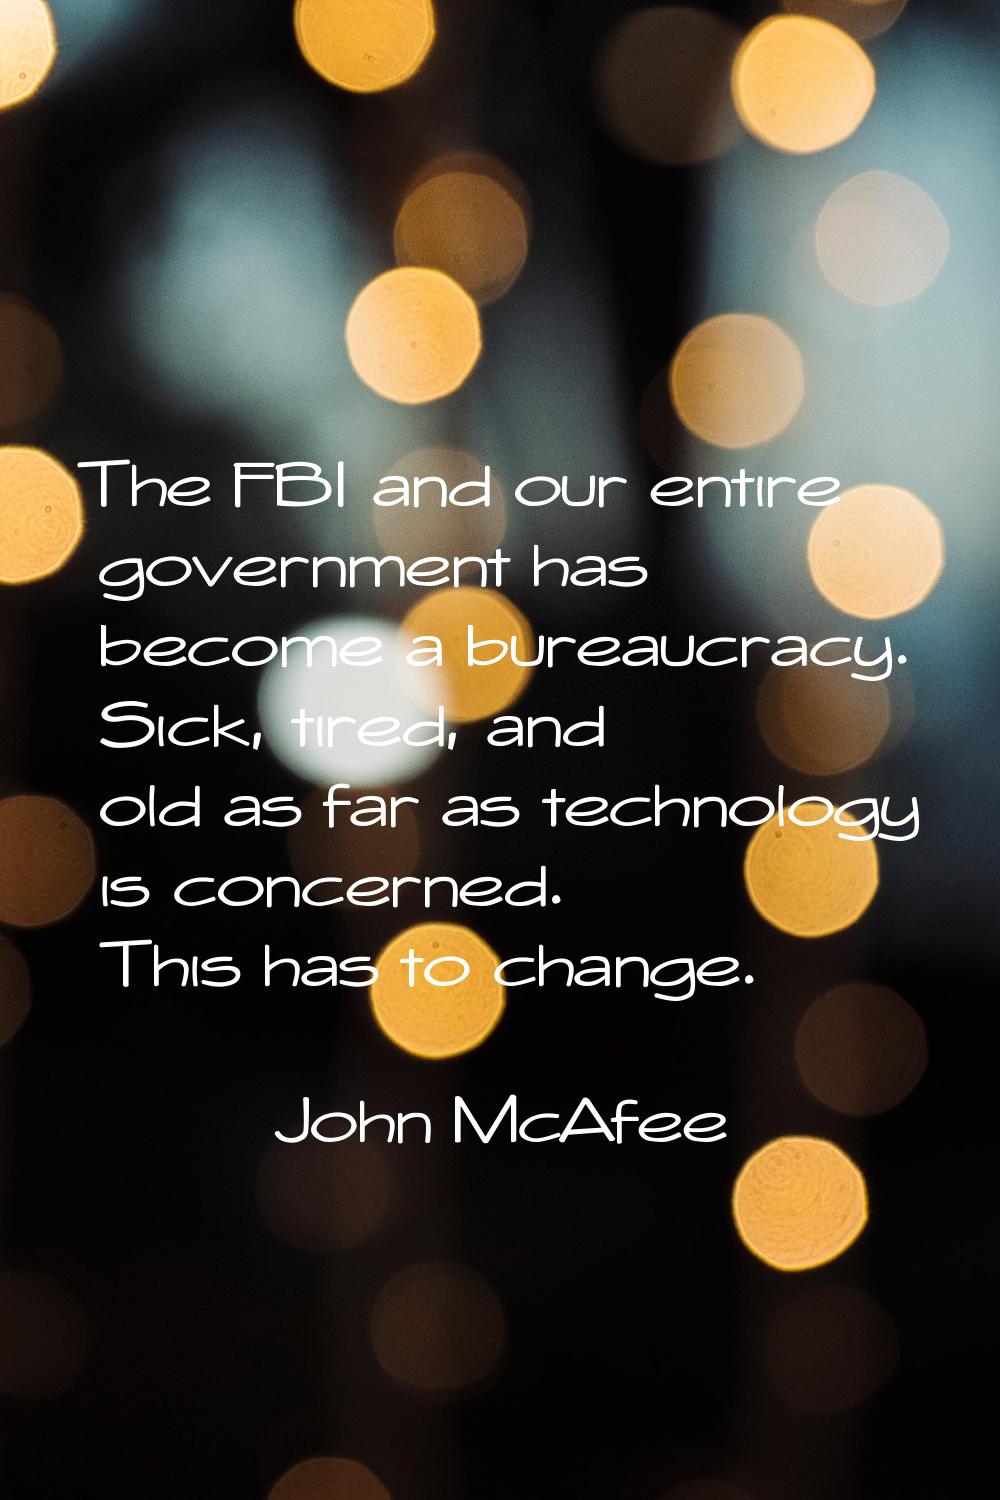 The FBI and our entire government has become a bureaucracy. Sick, tired, and old as far as technolo